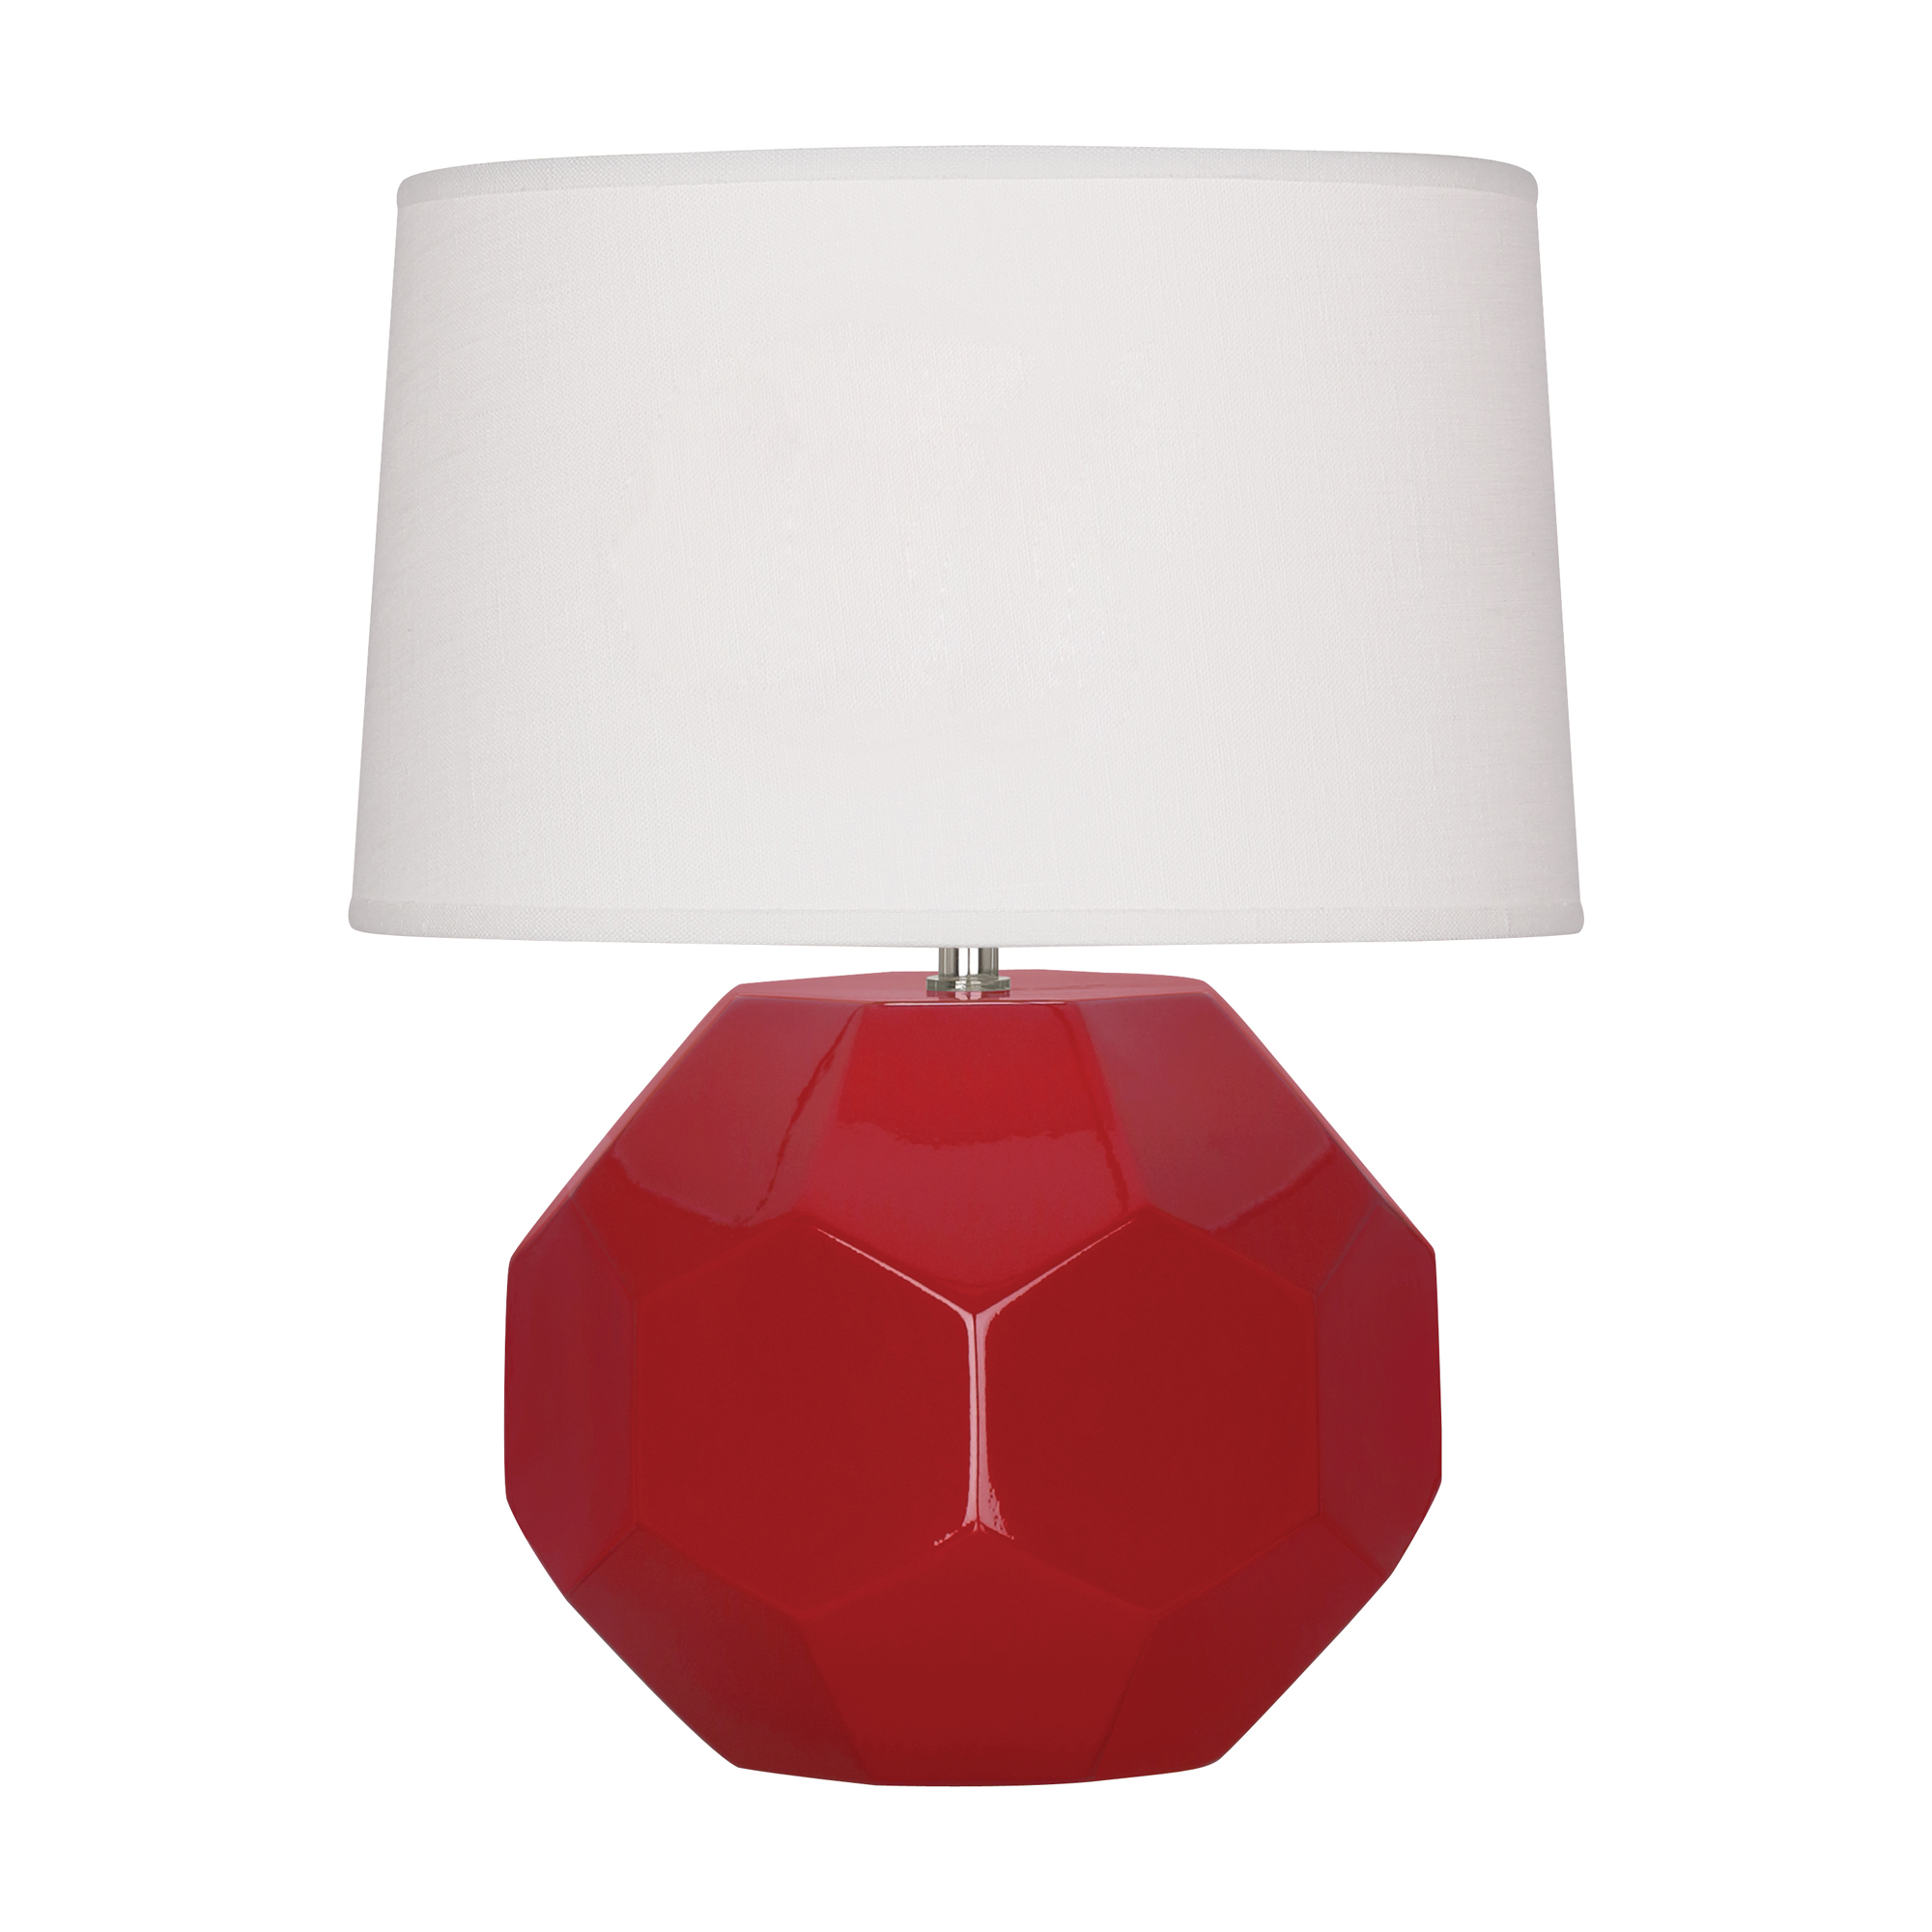 Franklin Accent Lamp Style #RR02